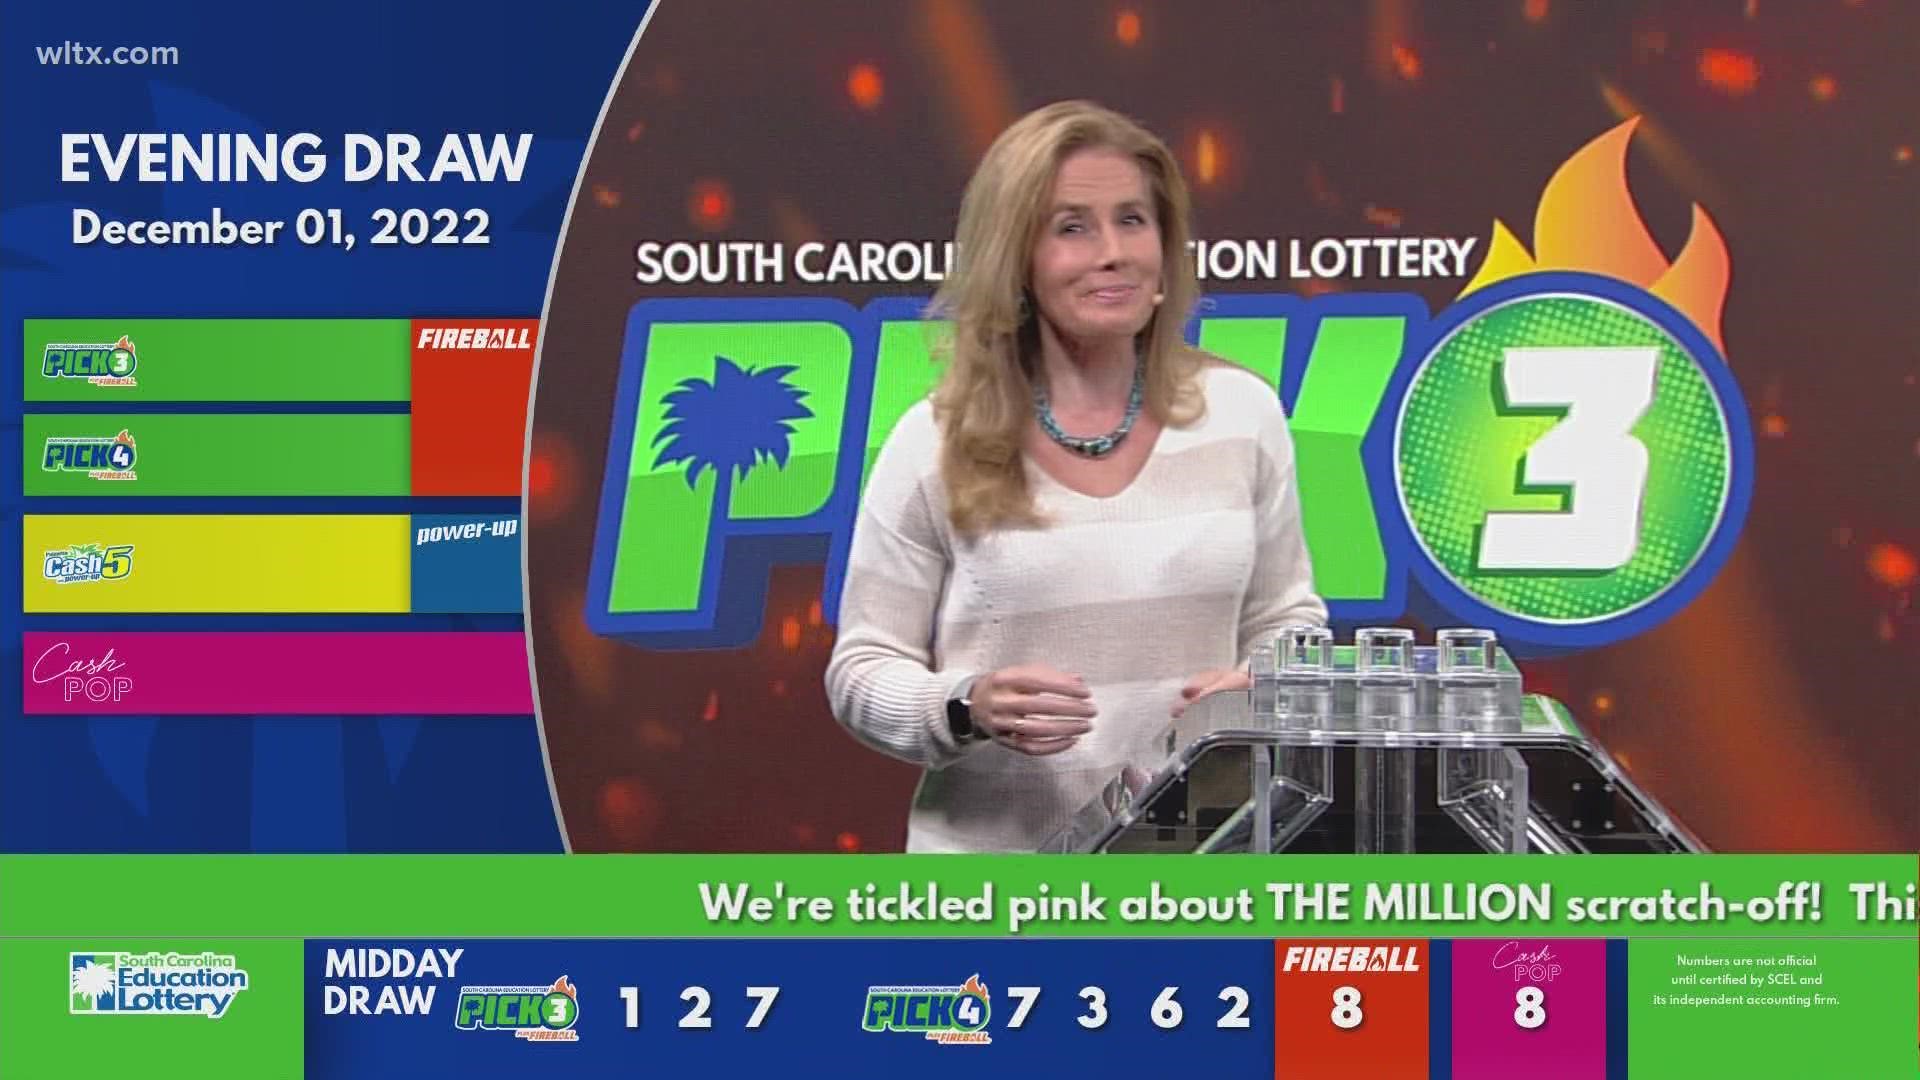 Here are the SC evening winning lottery numbers for Thursday, December 1, 2022.